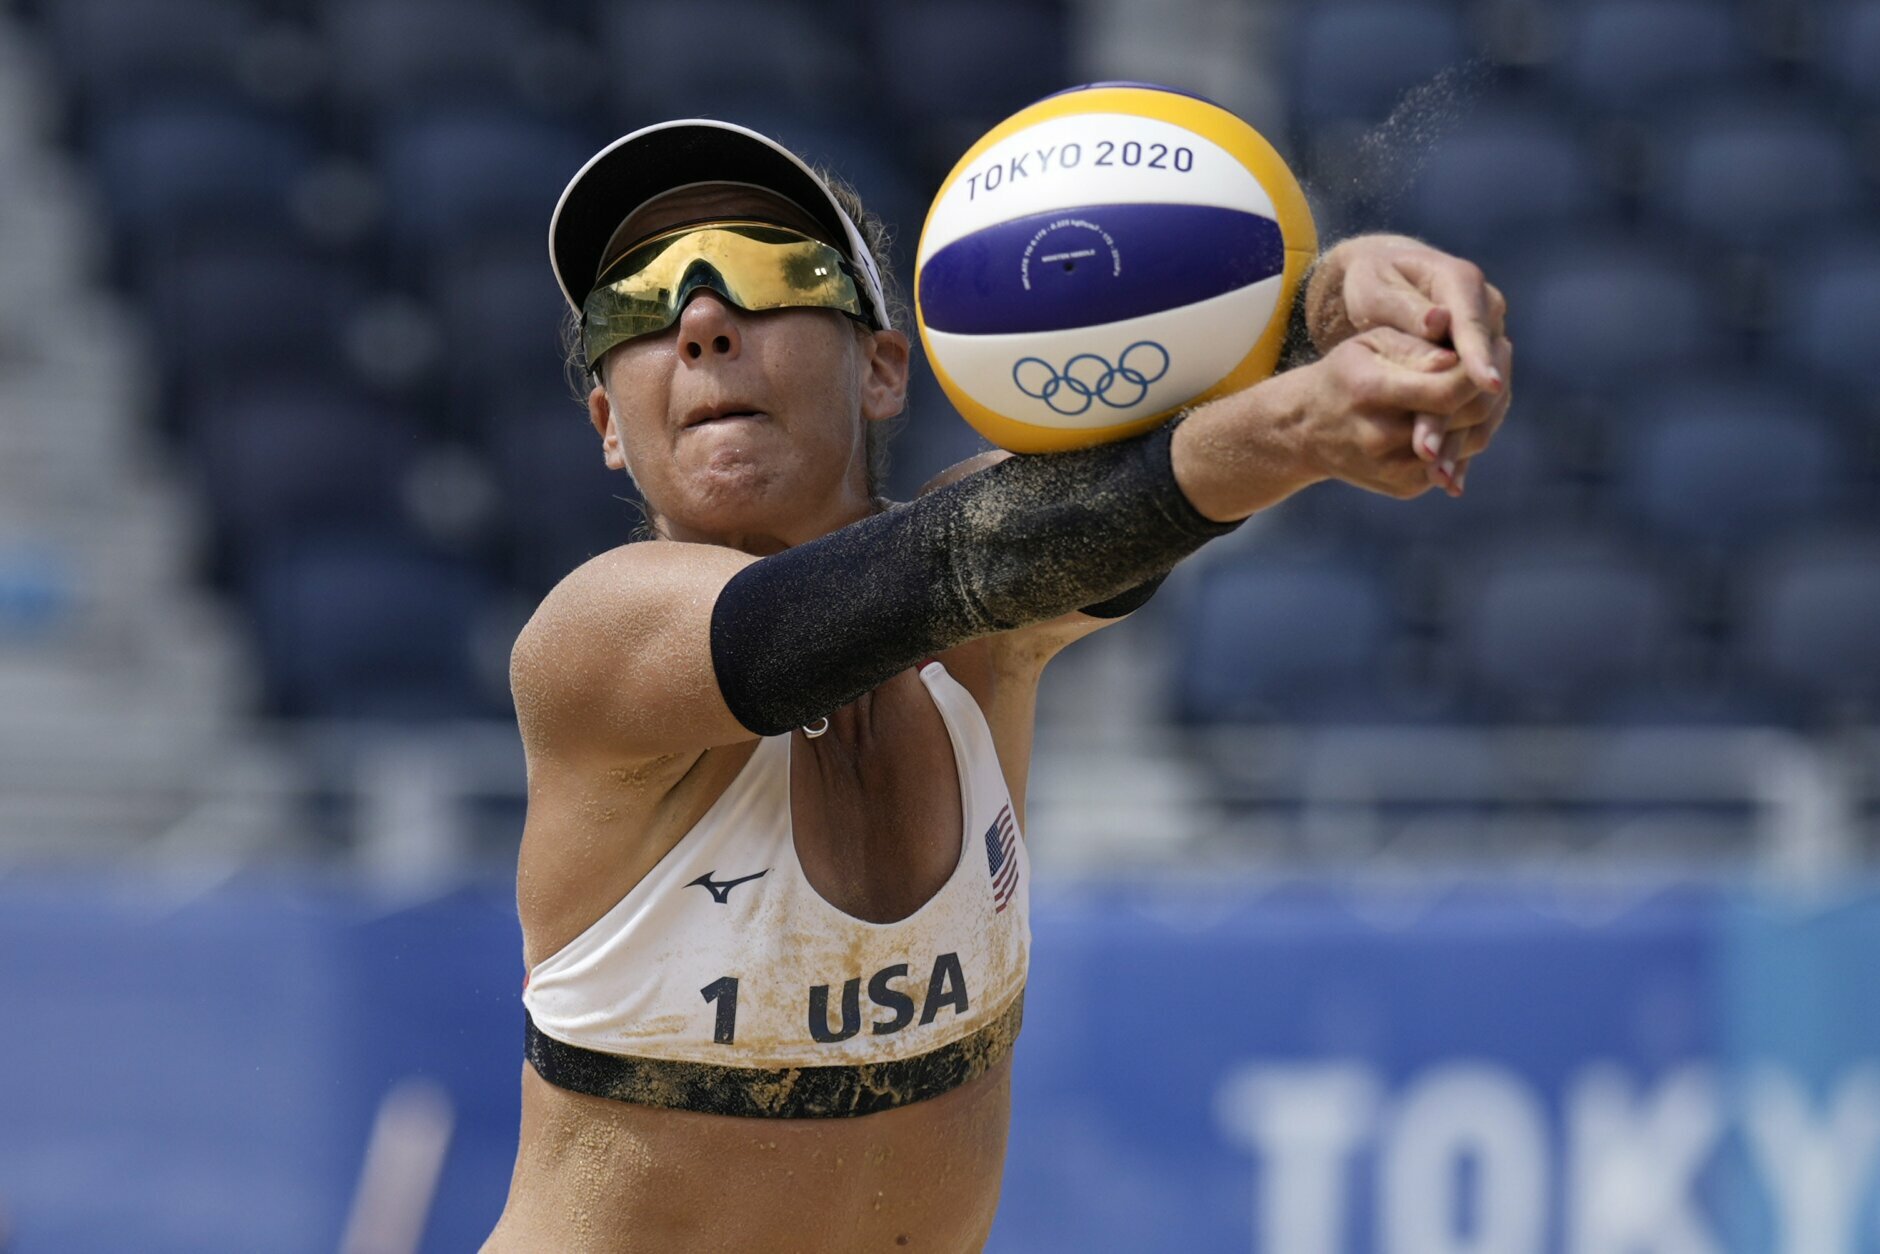 Olympics U.S. men's beach volleyball athlete tests positive for